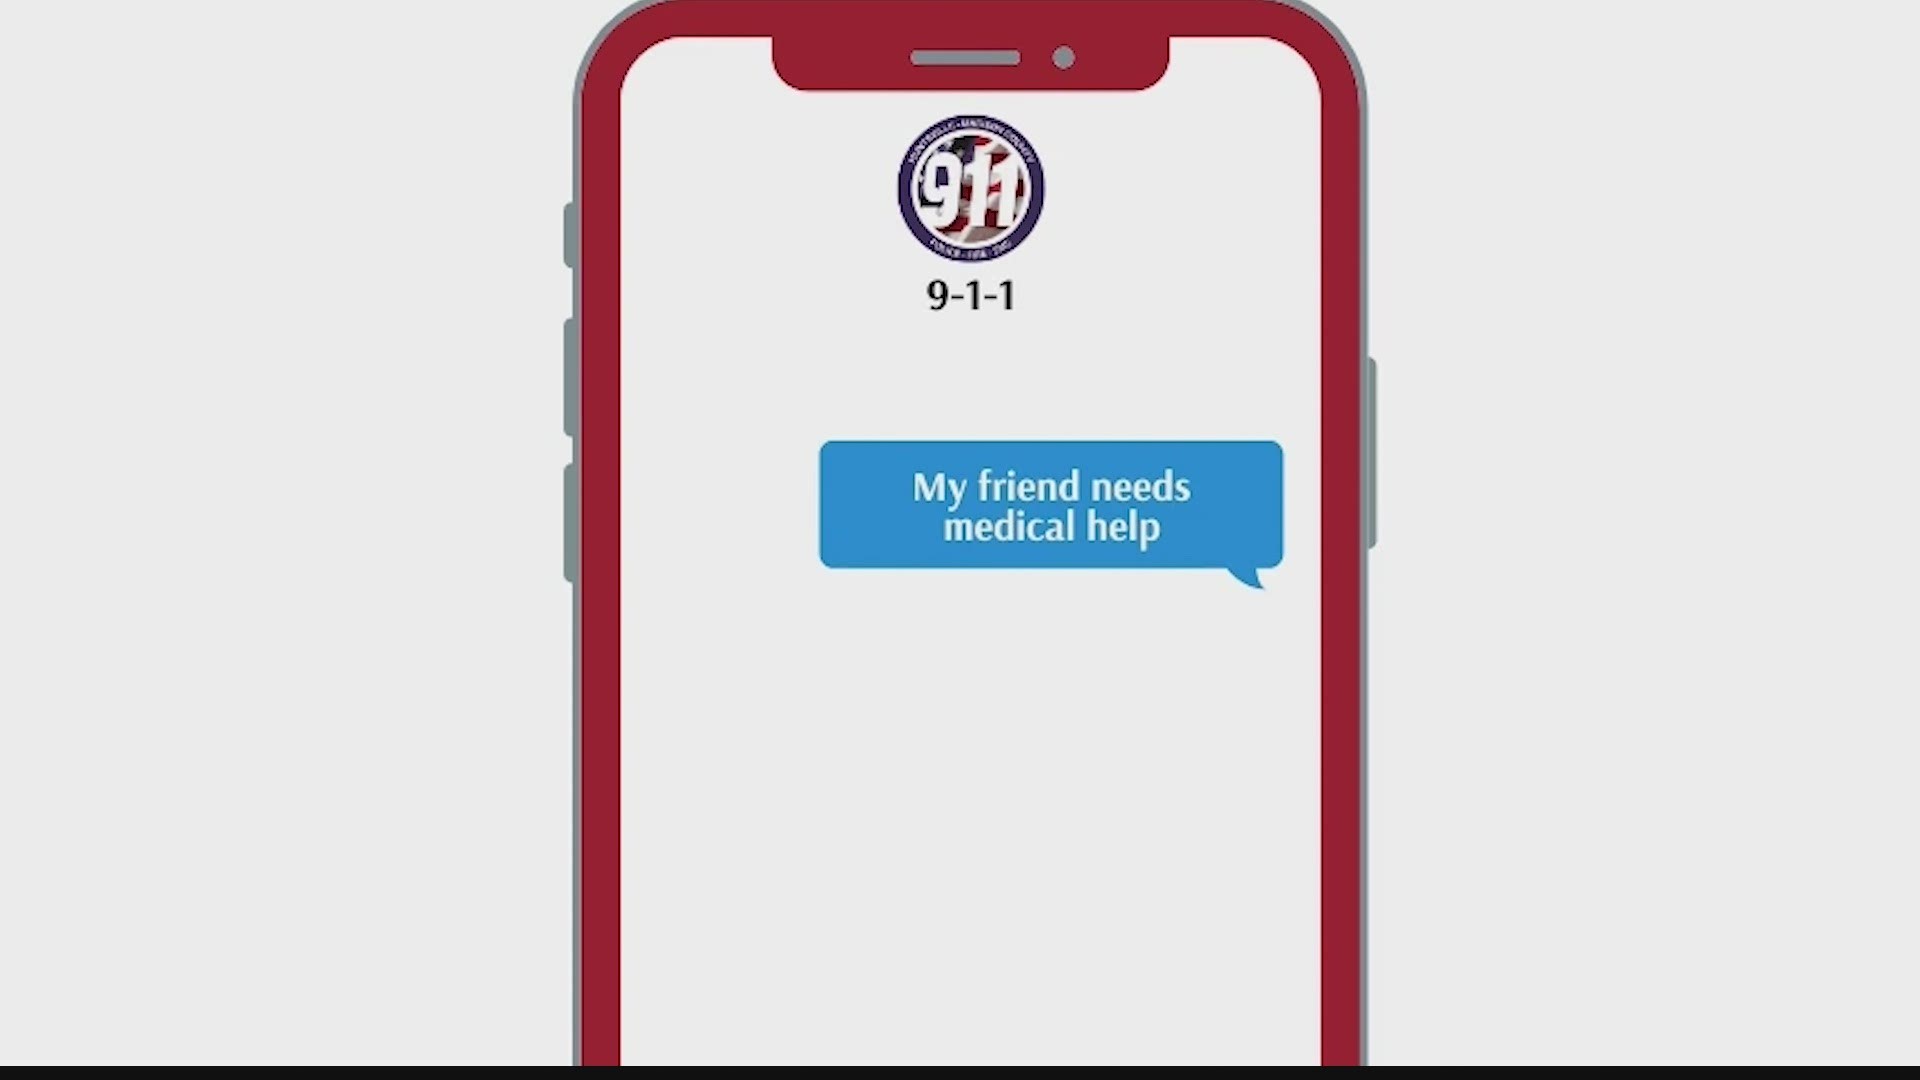 "Call when you can, text when you can't." Text-to-911 is a secondary option when you can't make a phone call.